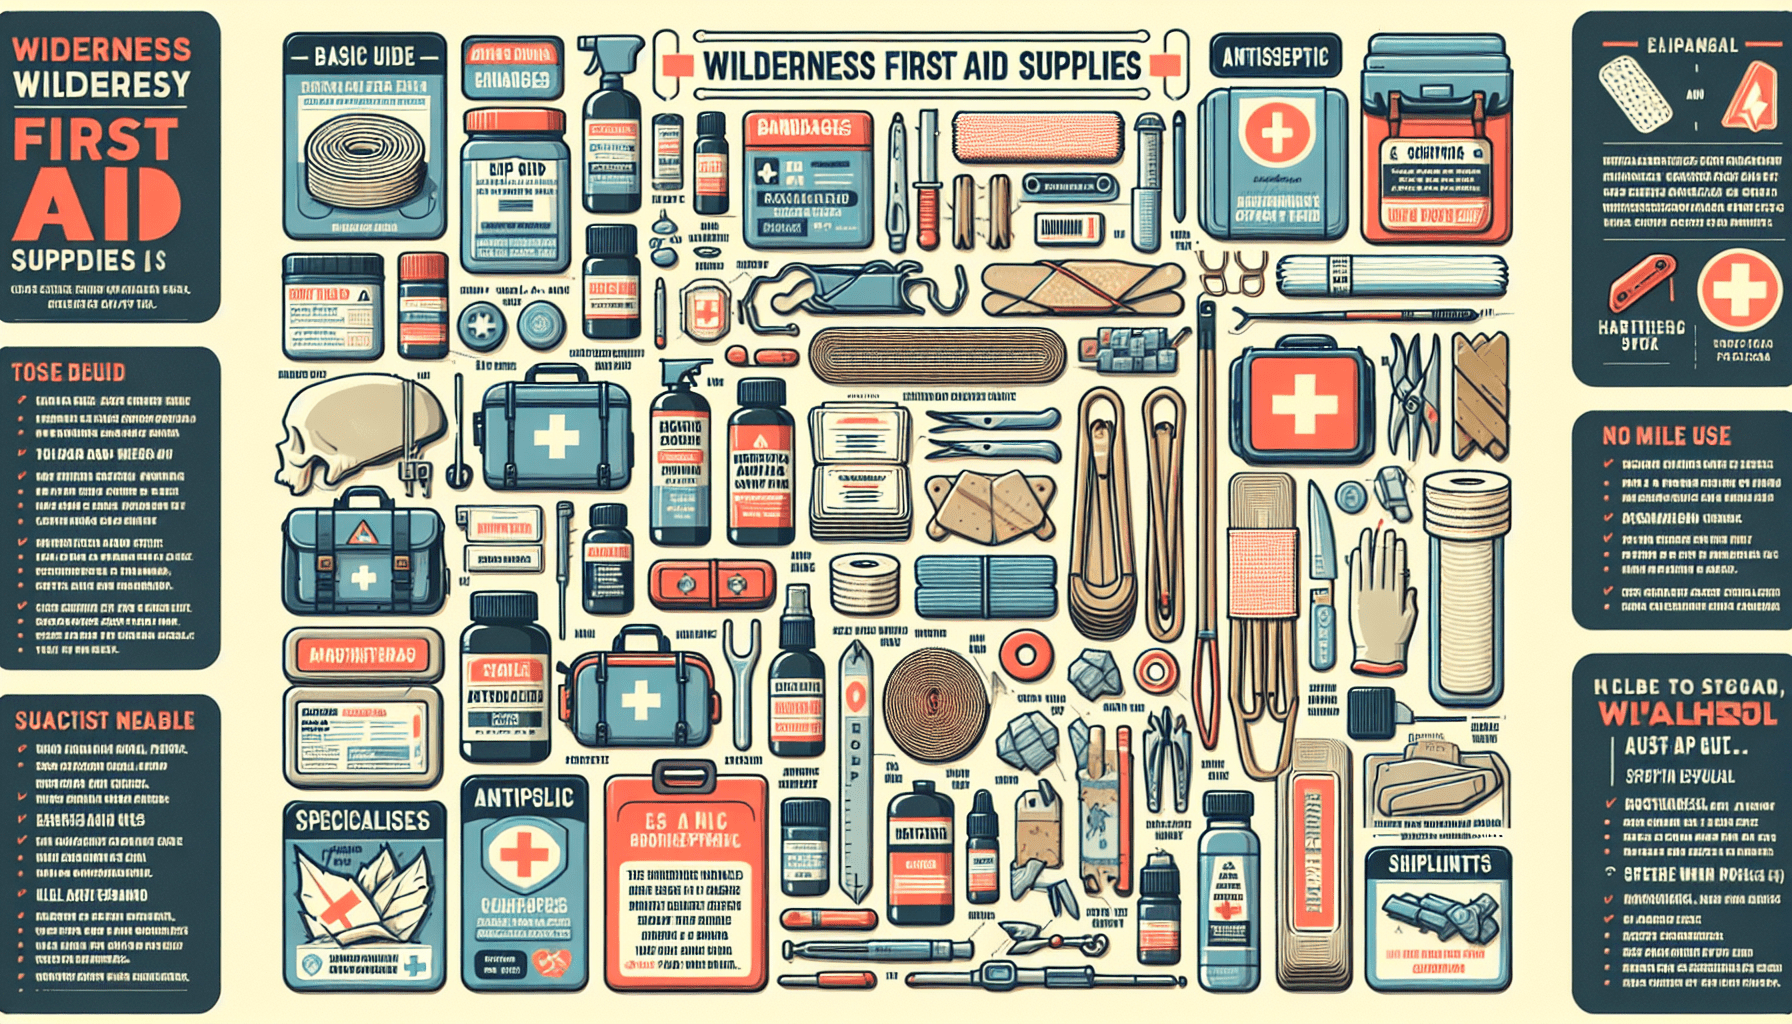 Top Wilderness First Aid Supplies To Have